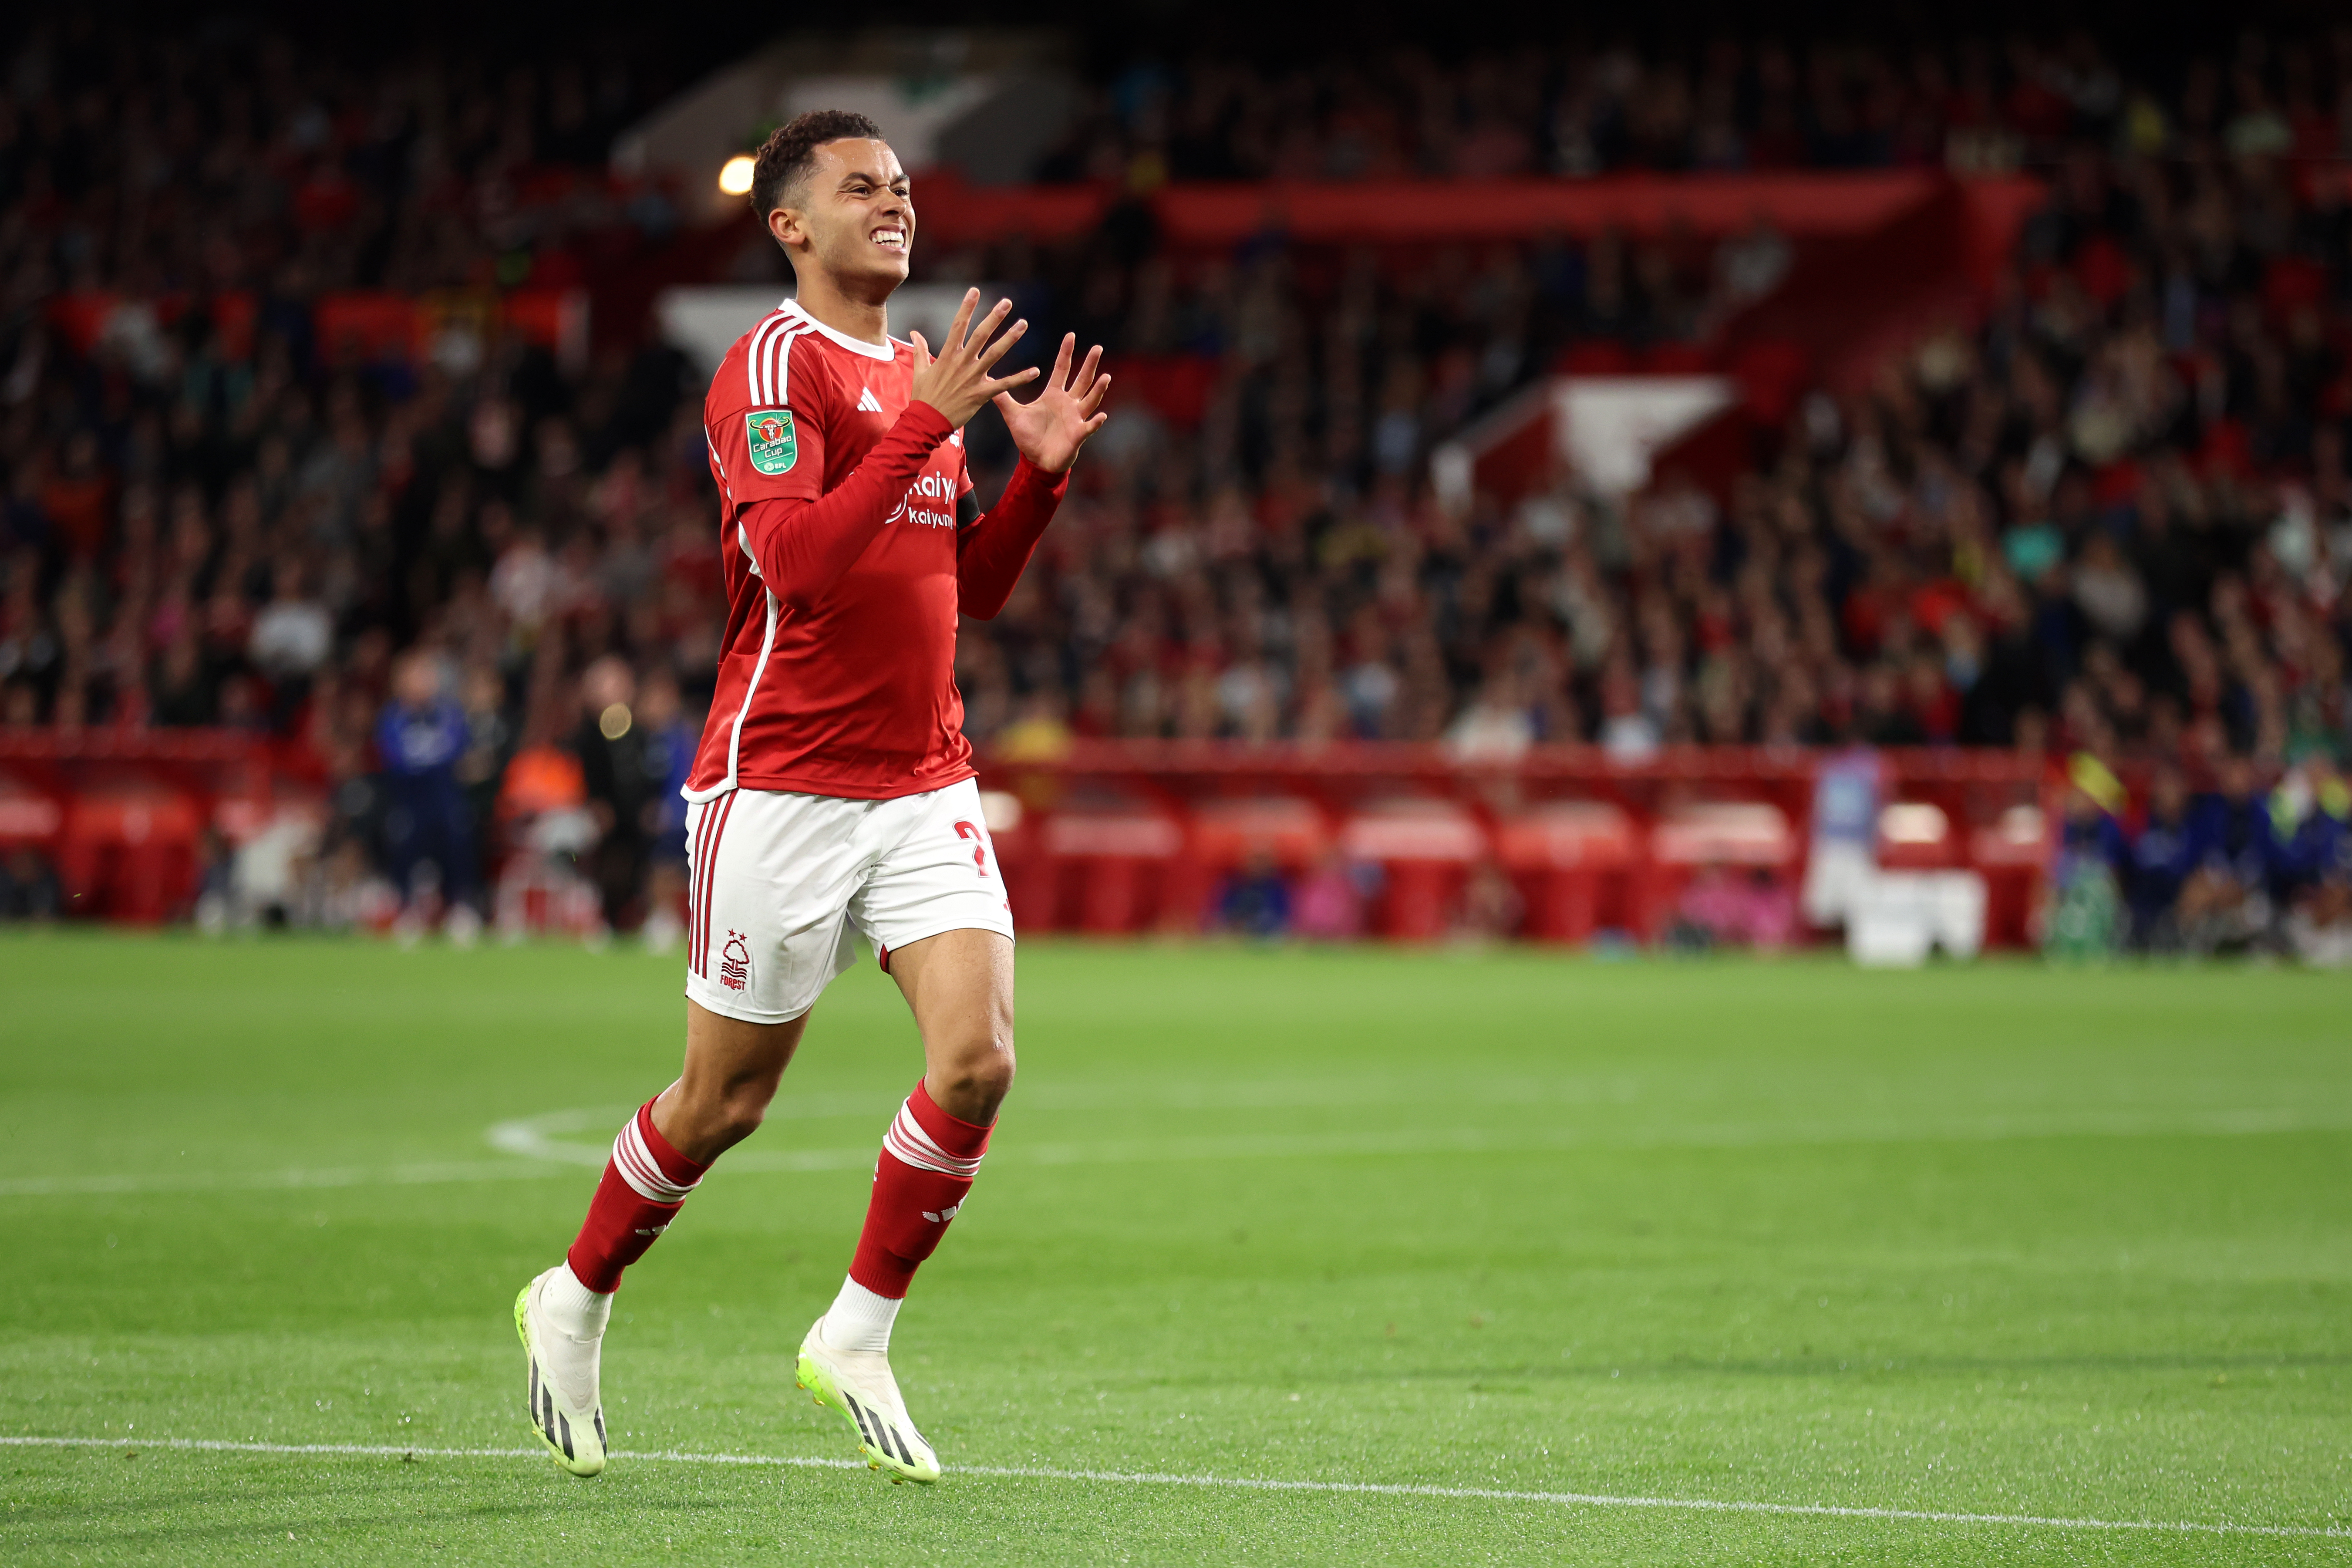 Nottingham Forest v Burnley - Carabao Cup Second Round